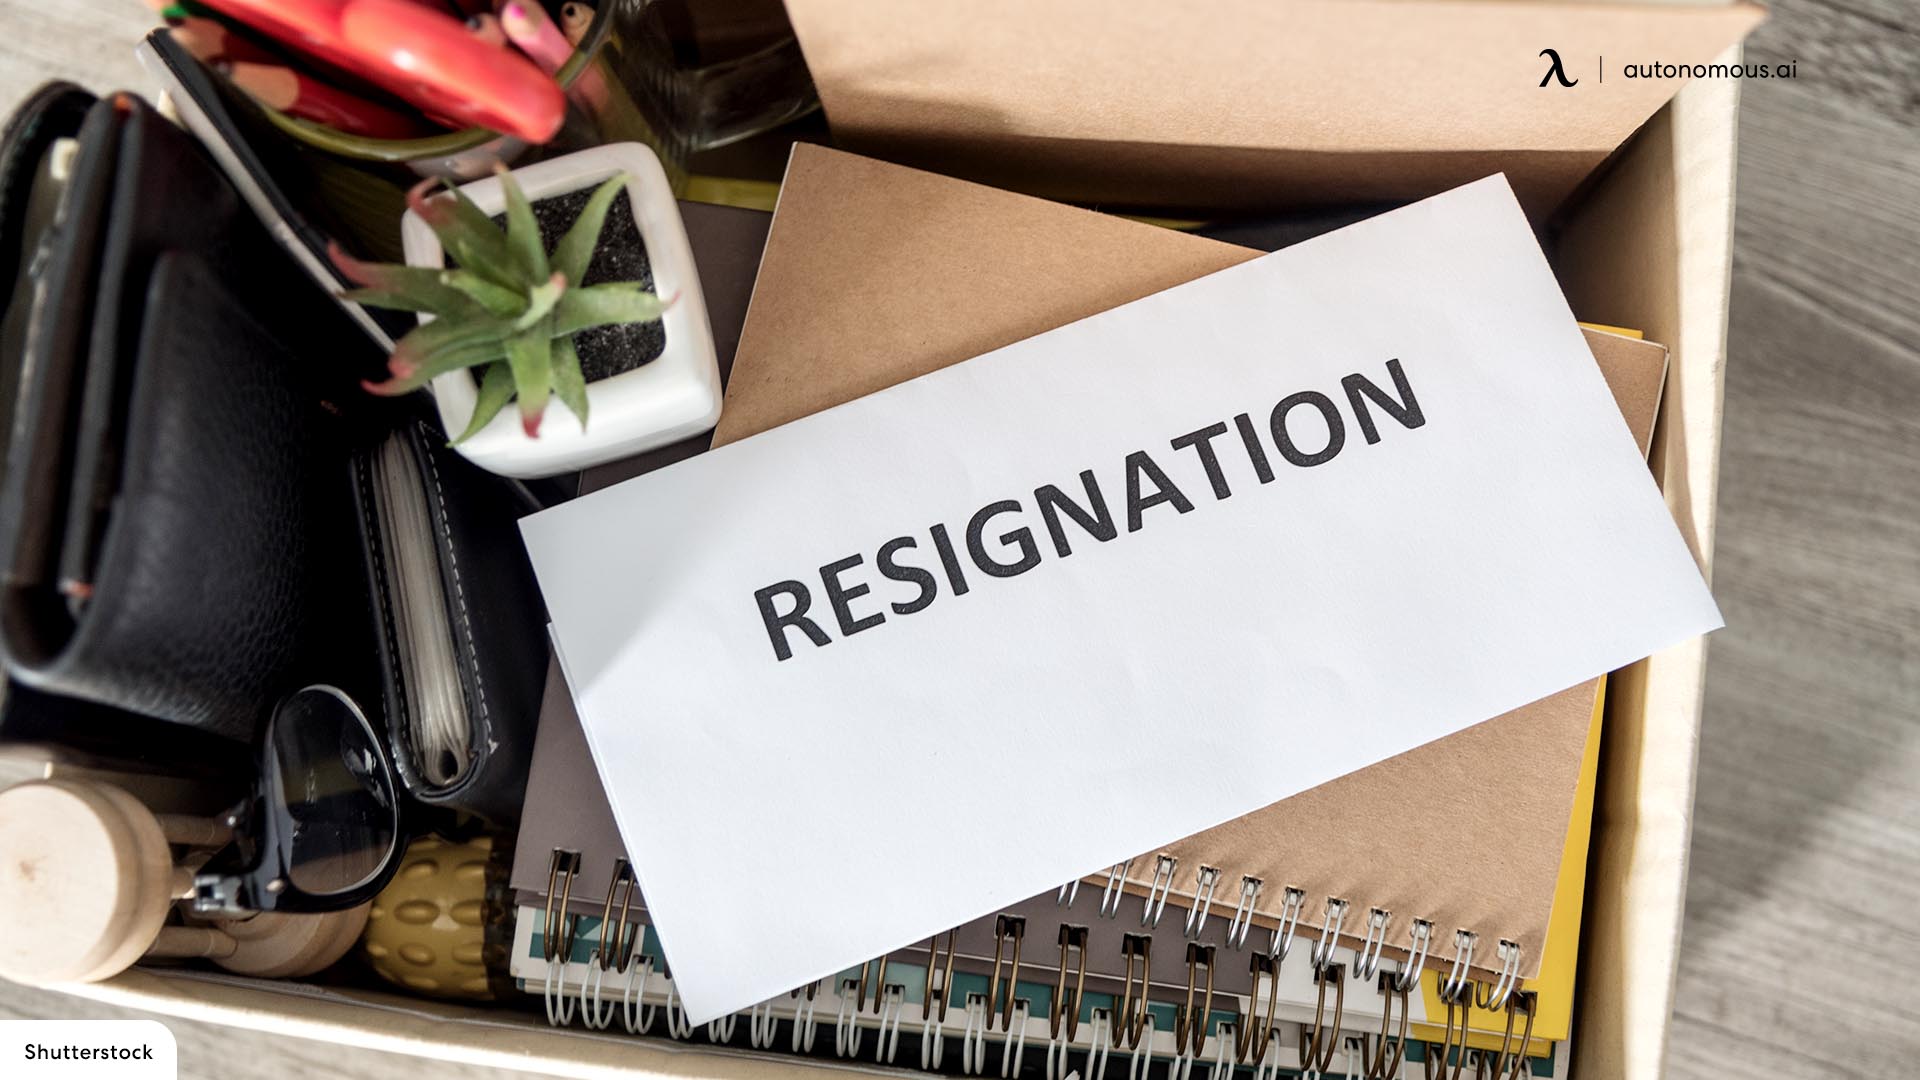 Do not be disheartened when an employee resigns from your company.